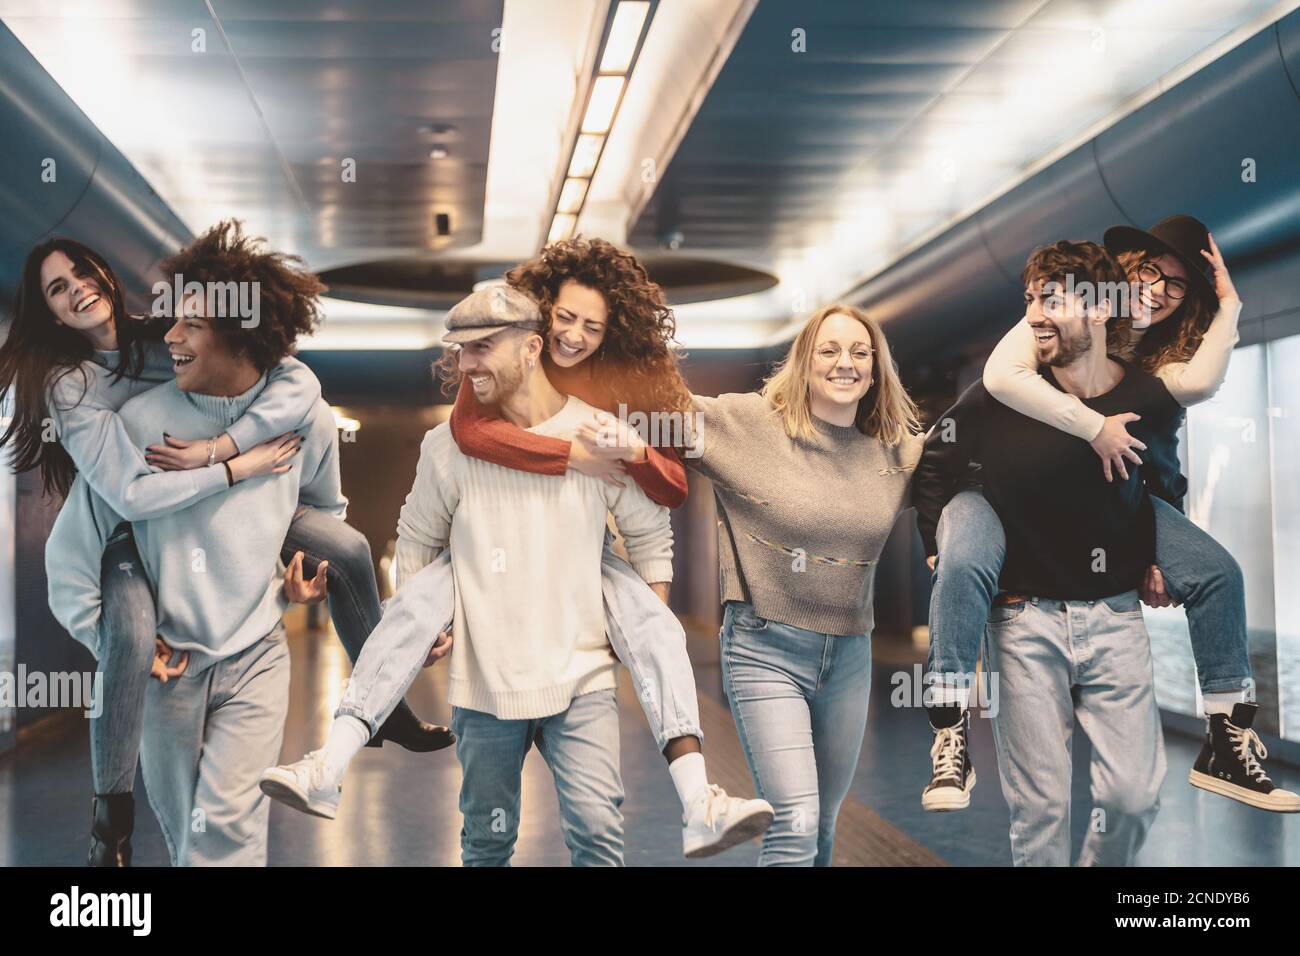 Group young friends having fun piggybacking in underground metropolitan subway - Happy trendy people enjoying nightlife and laughing together Stock Photo